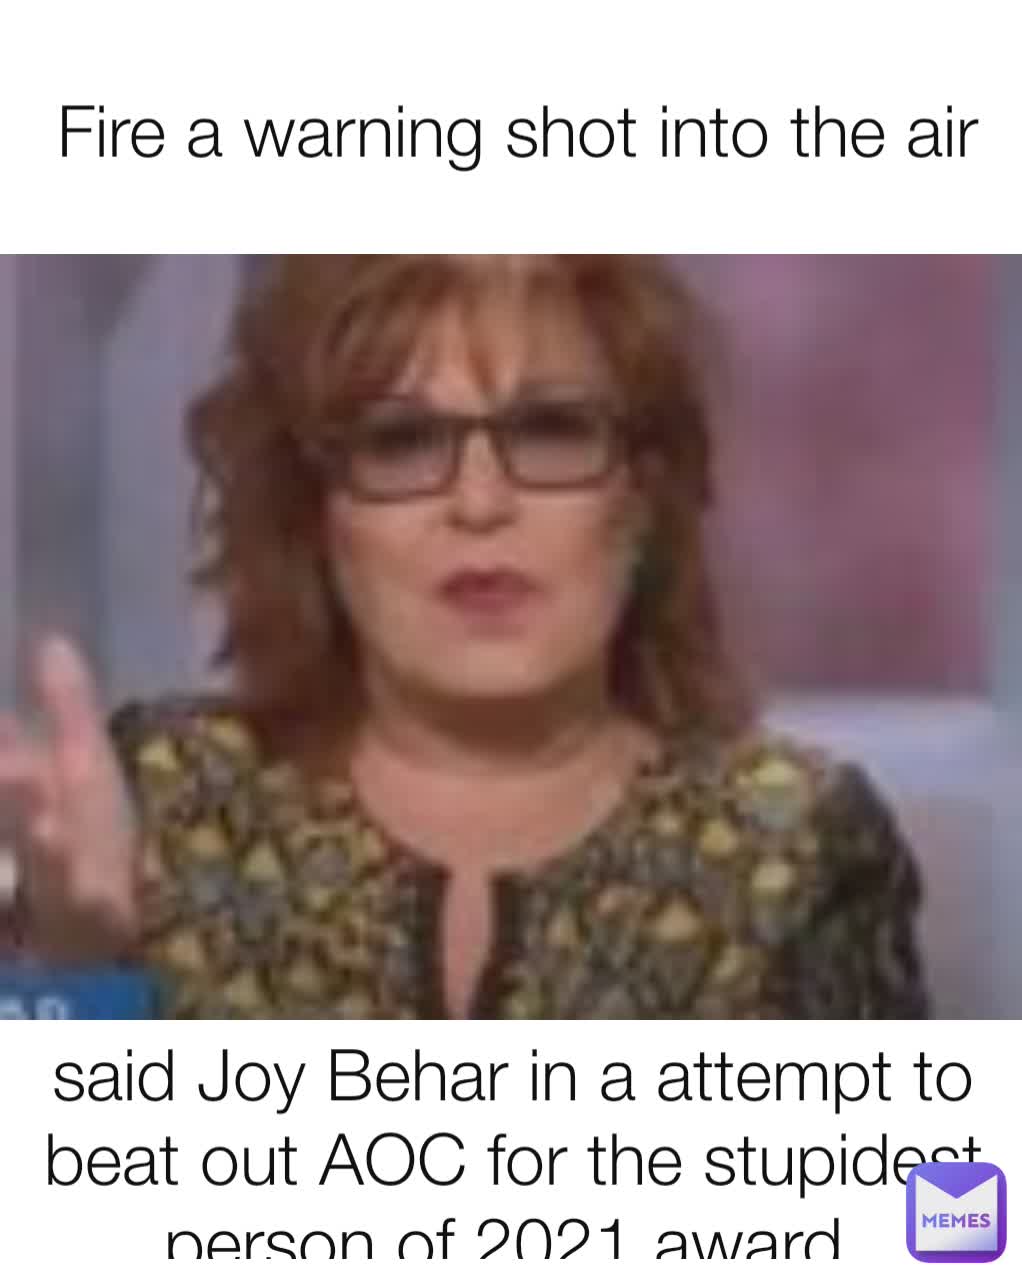 Fire a warning shot into the air said Joy Behar in a attempt to beat out AOC for the stupidest person of 2021 award 